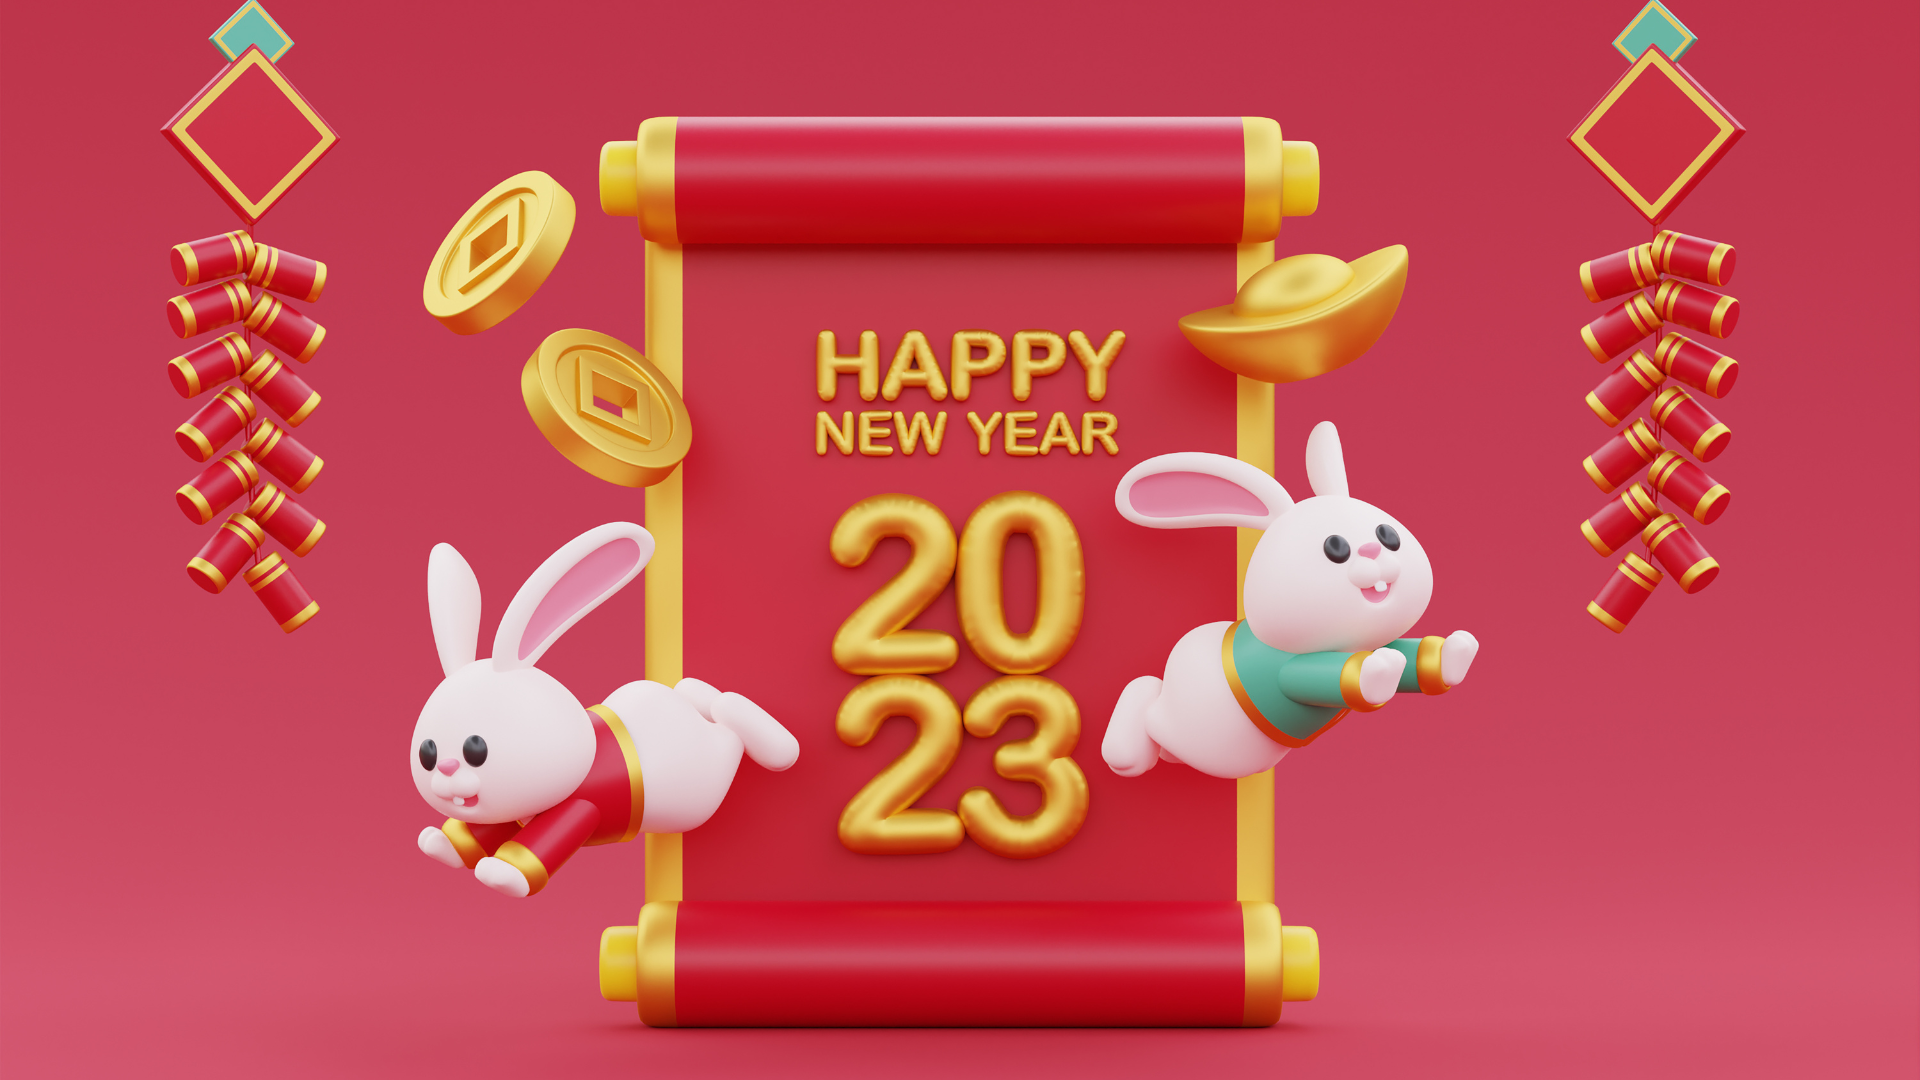 2023 is the Year Of the Rabbit | Golden Haven